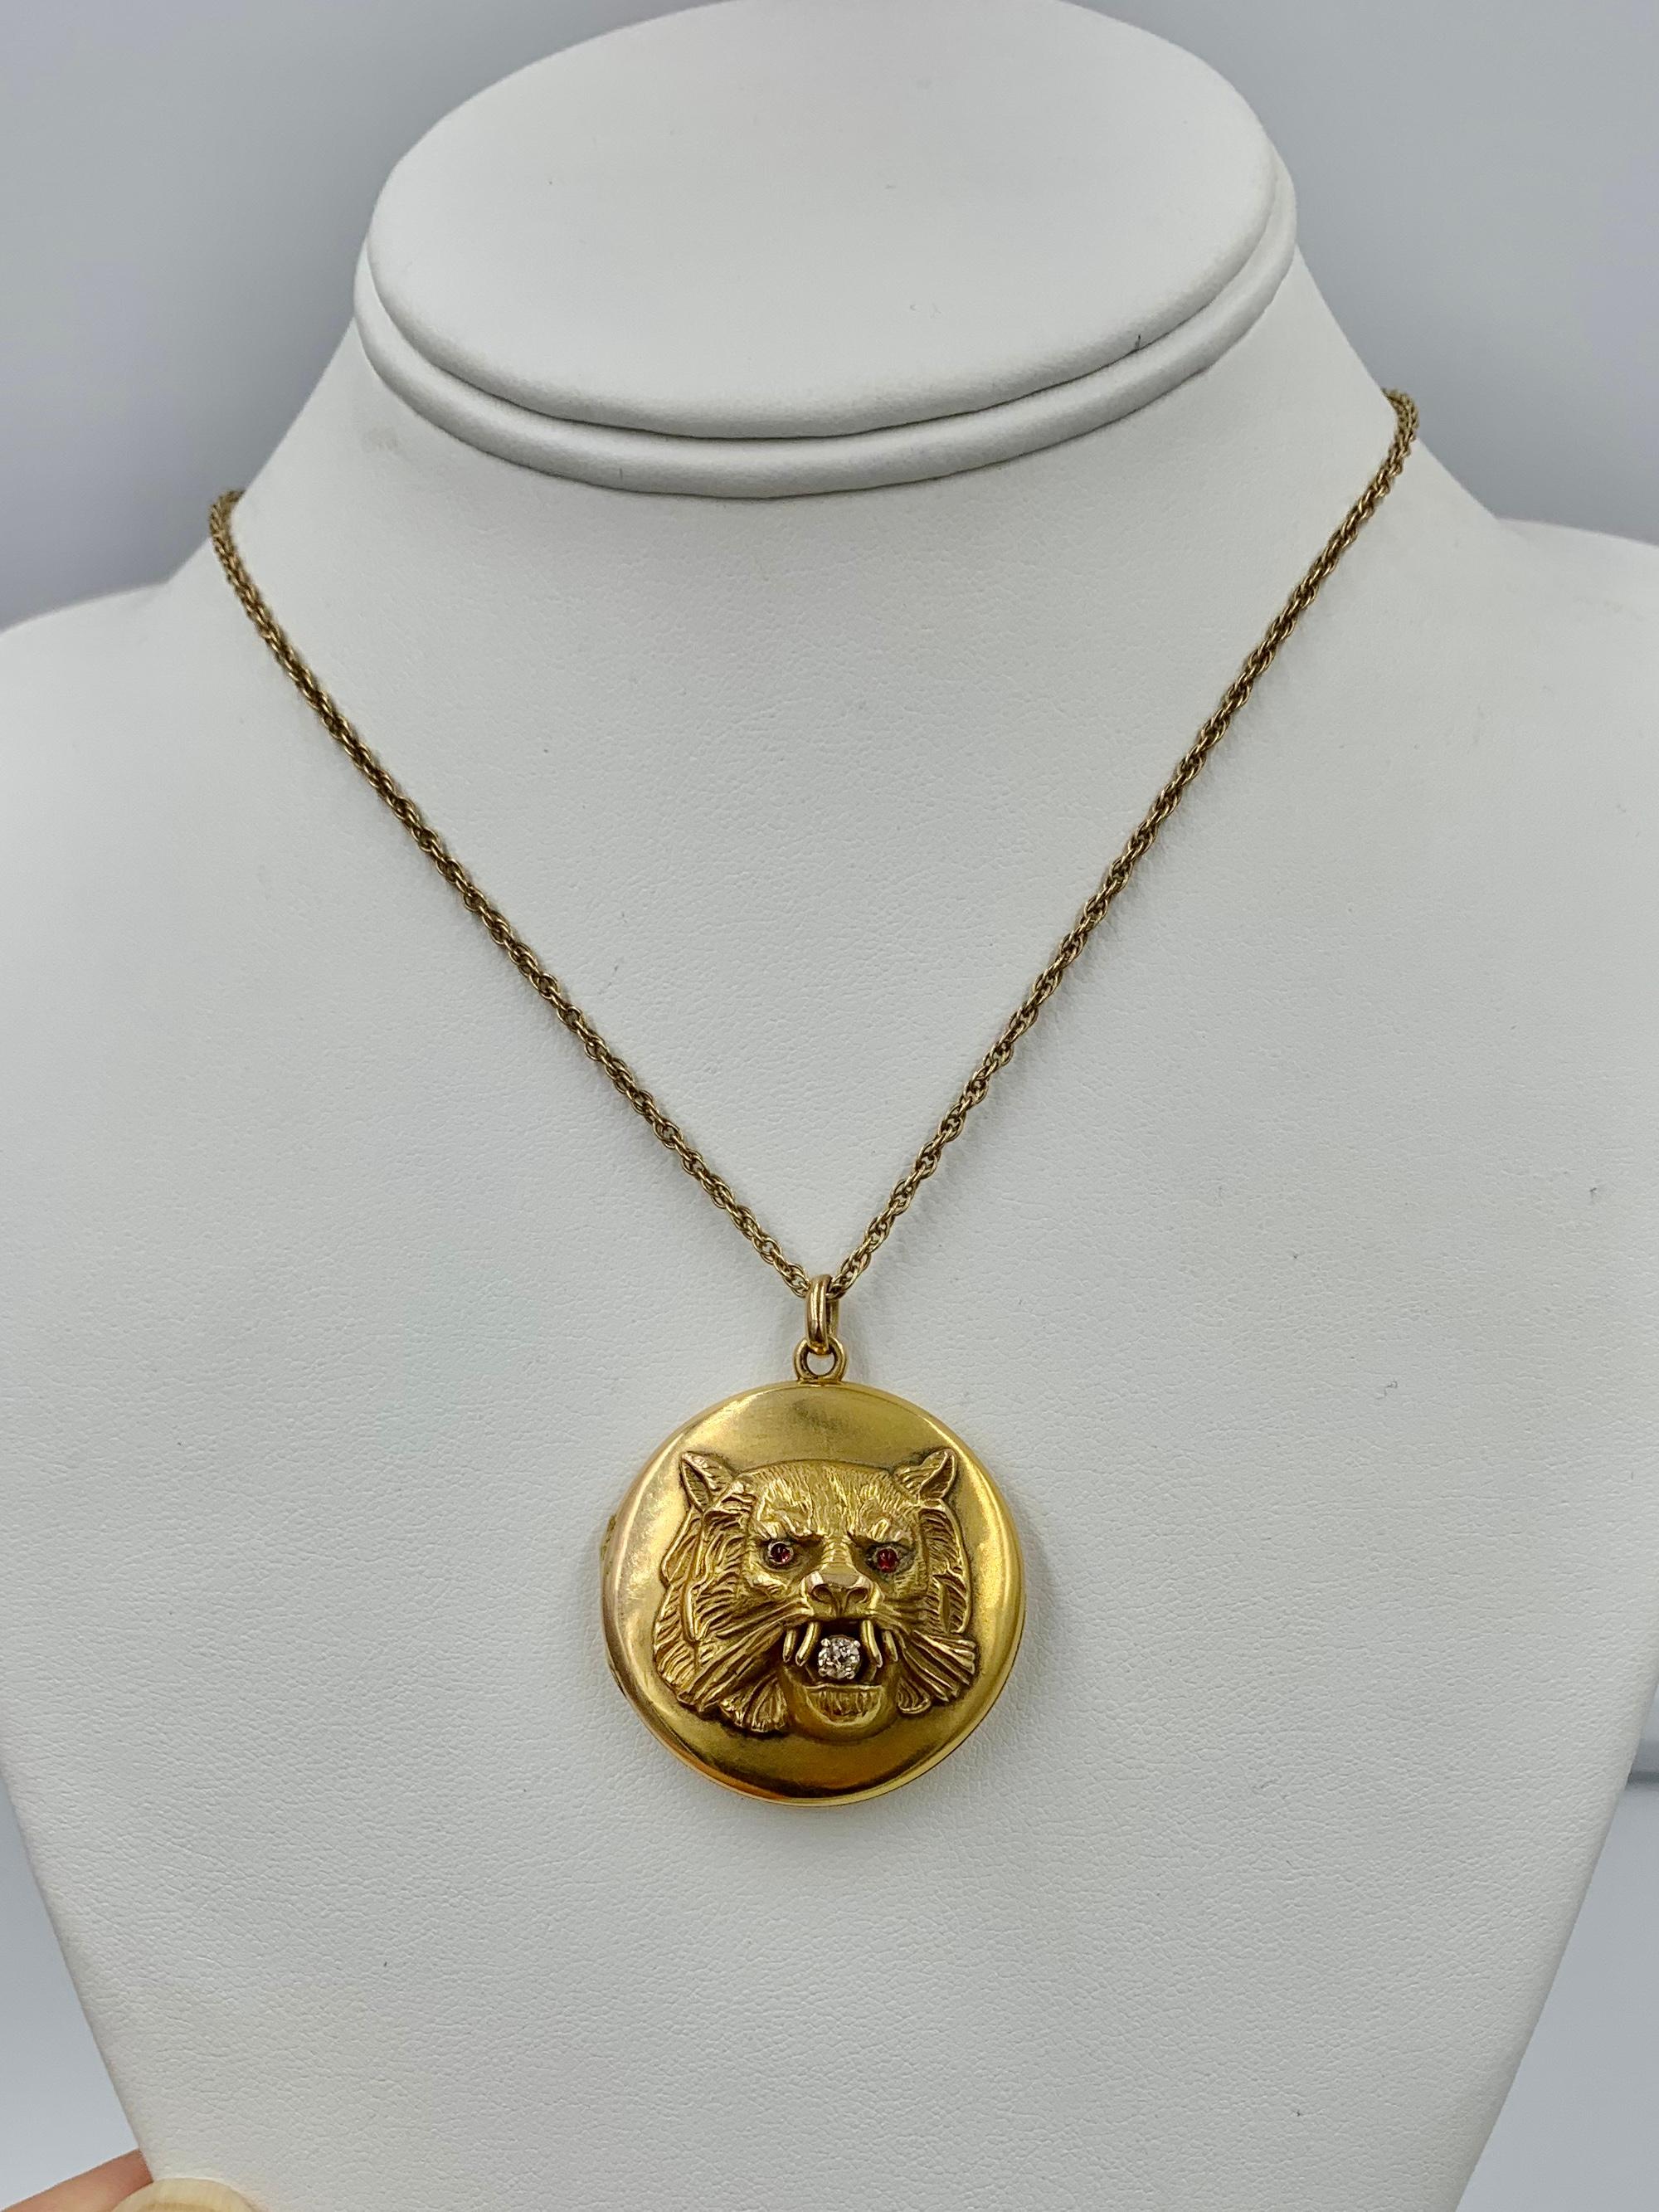 A spectacular antique Victorian lion, panther, leopard or tiger locket and chain in 14 Karat Gold with an Old Mine Cut Diamond in the mouth and Ruby cabochons in the eyes, in an extraordinary three-dimensional design.  One of the most spectacular